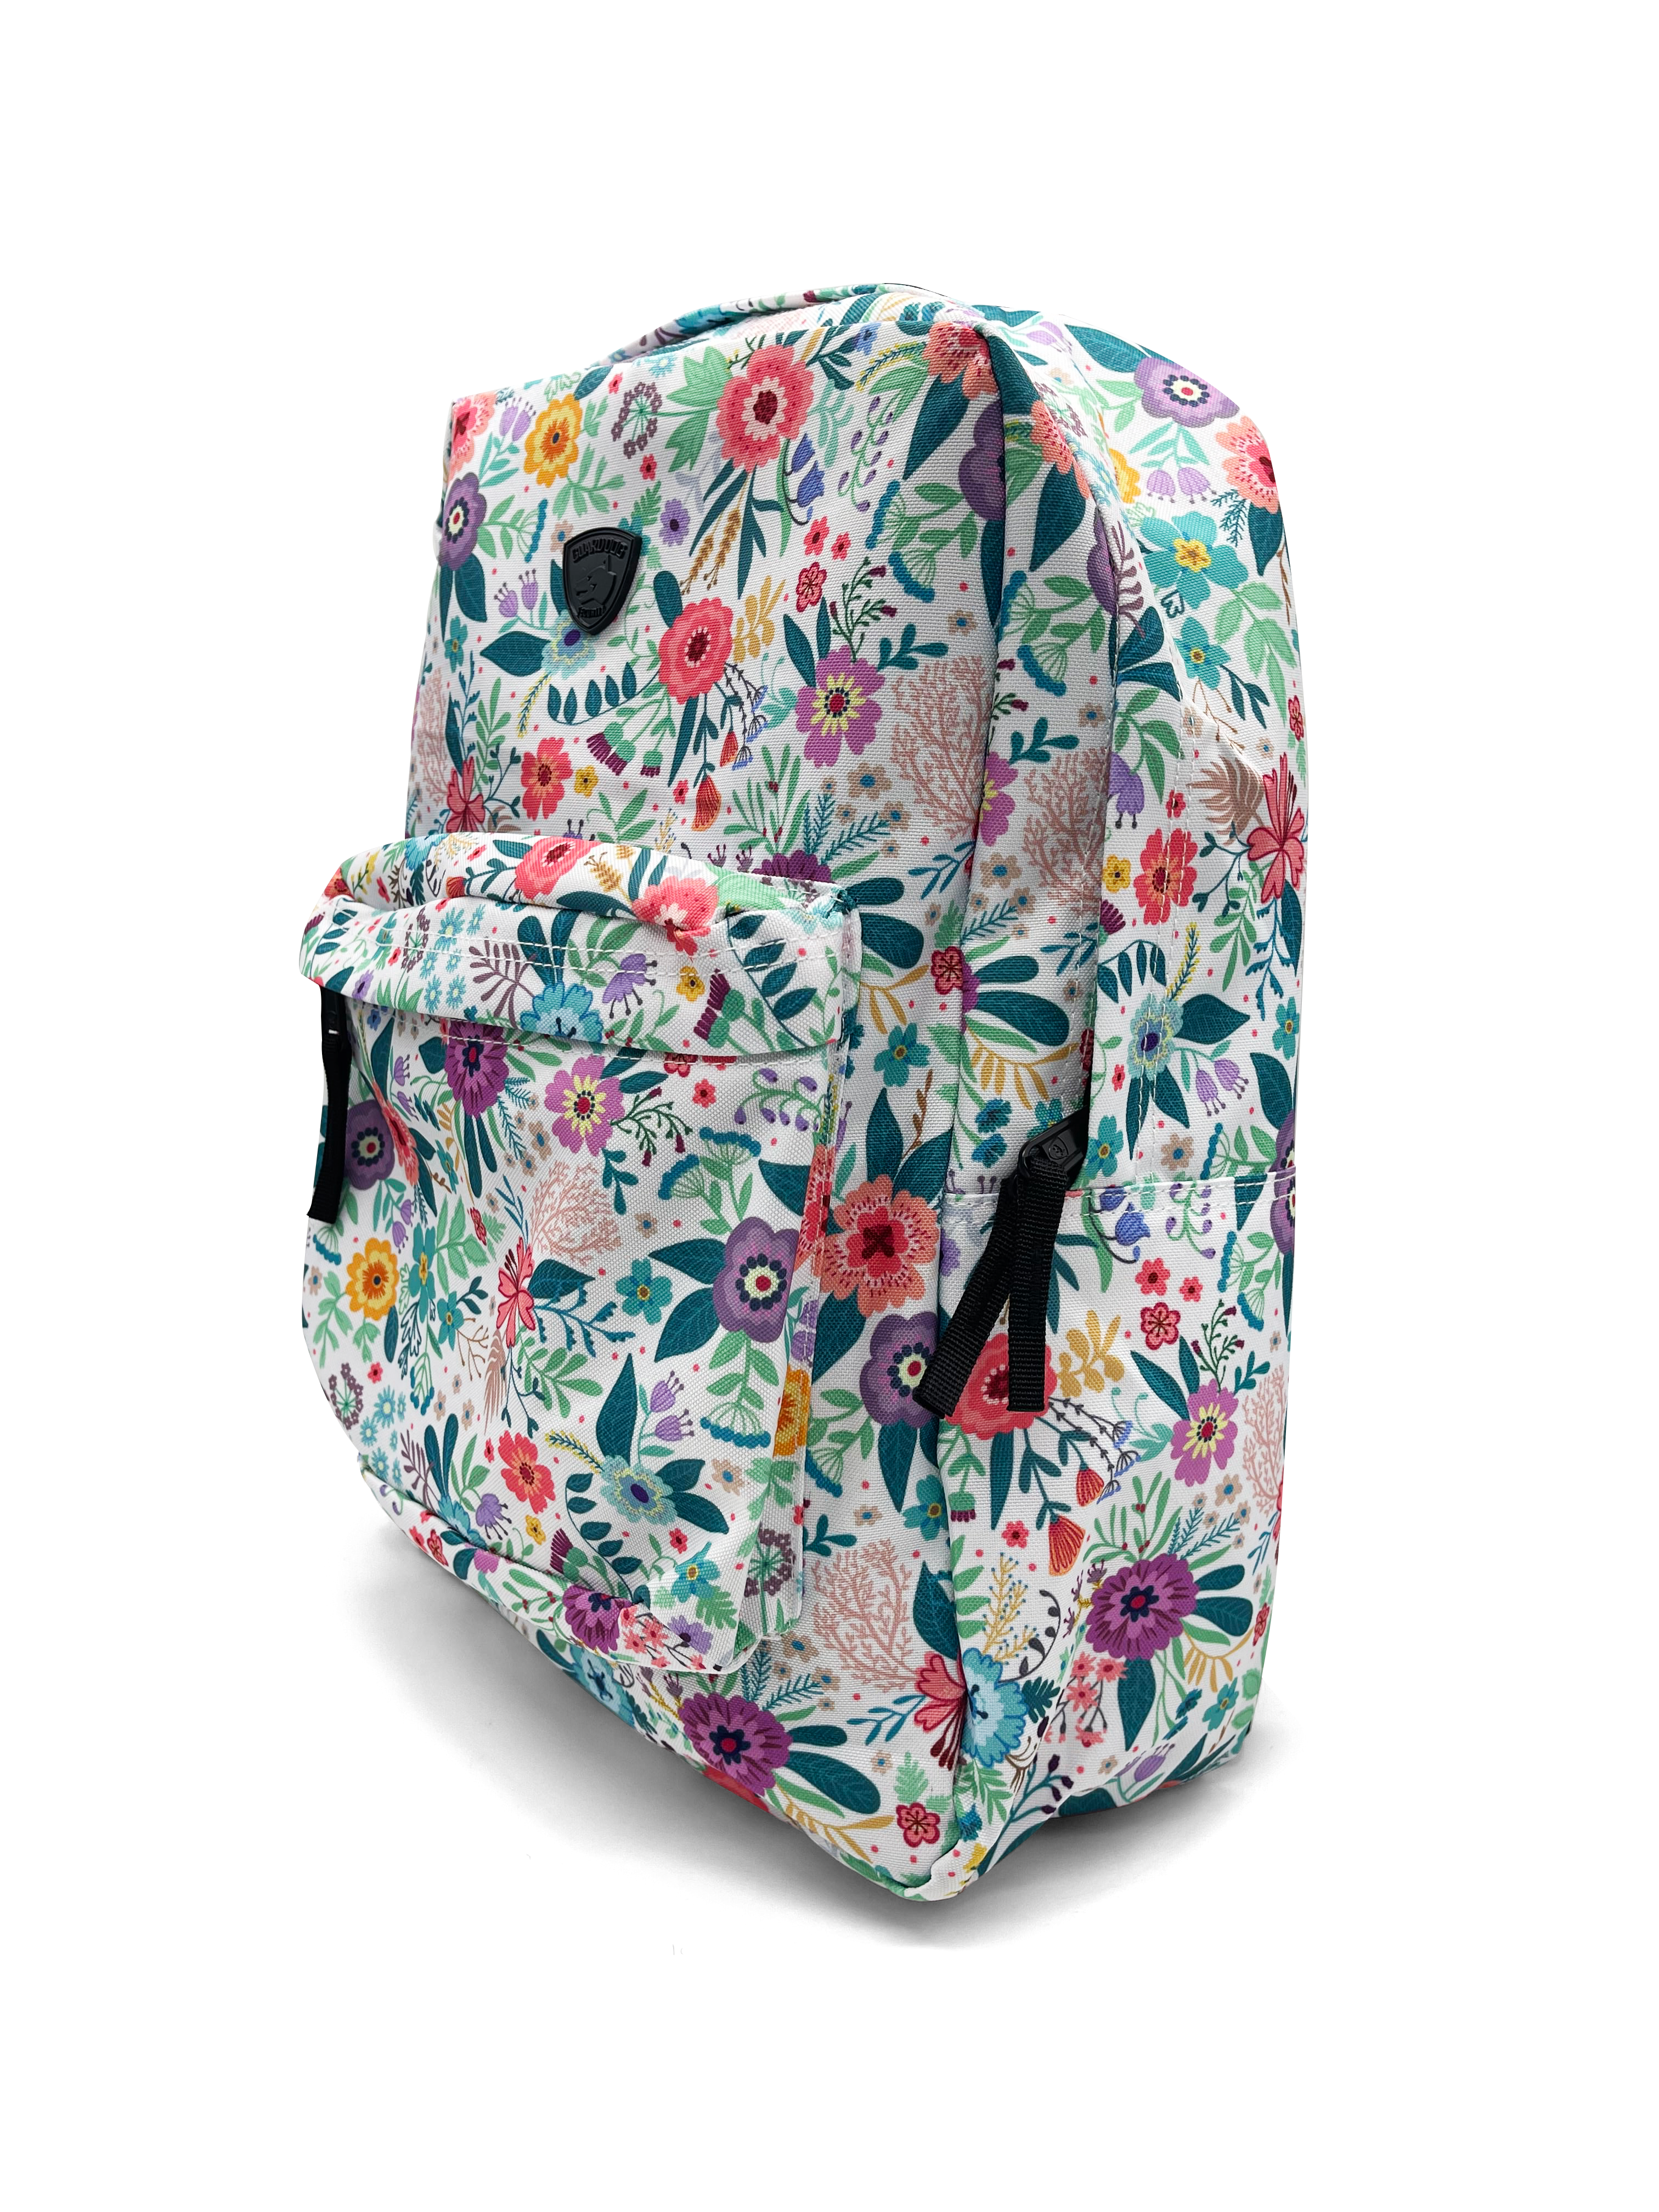 Proshield Scout - Bulletproof Backpack, Level IIIA, Youth Edition (Floral)